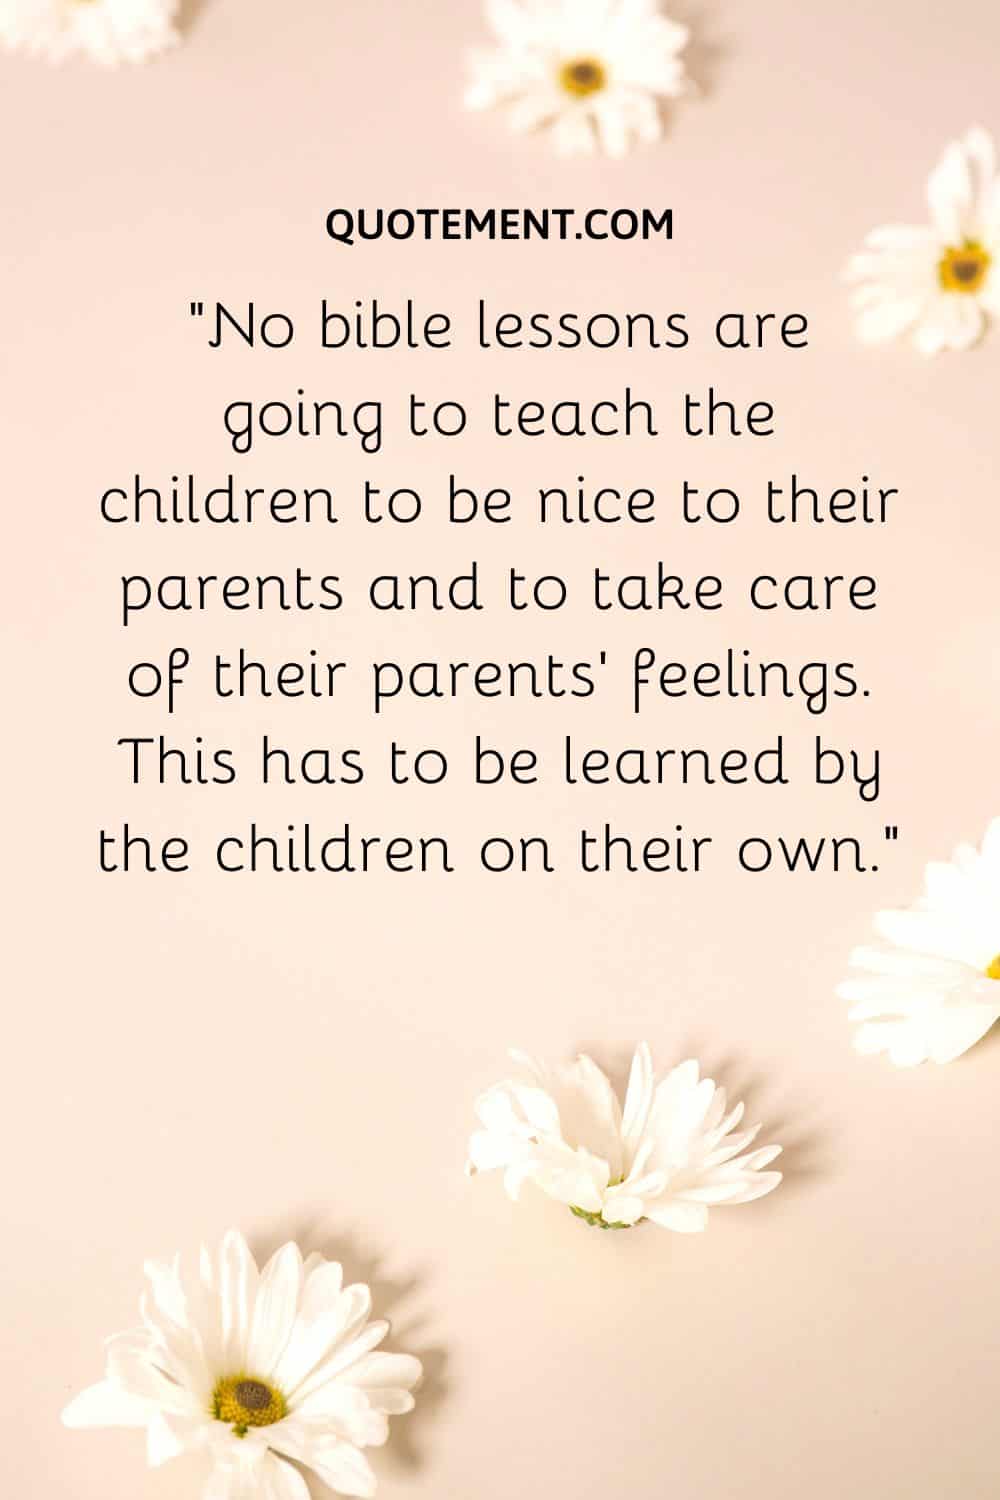 No bible lessons are going to teach the children to be nice to their parents and to take care of their parents’ feelings.